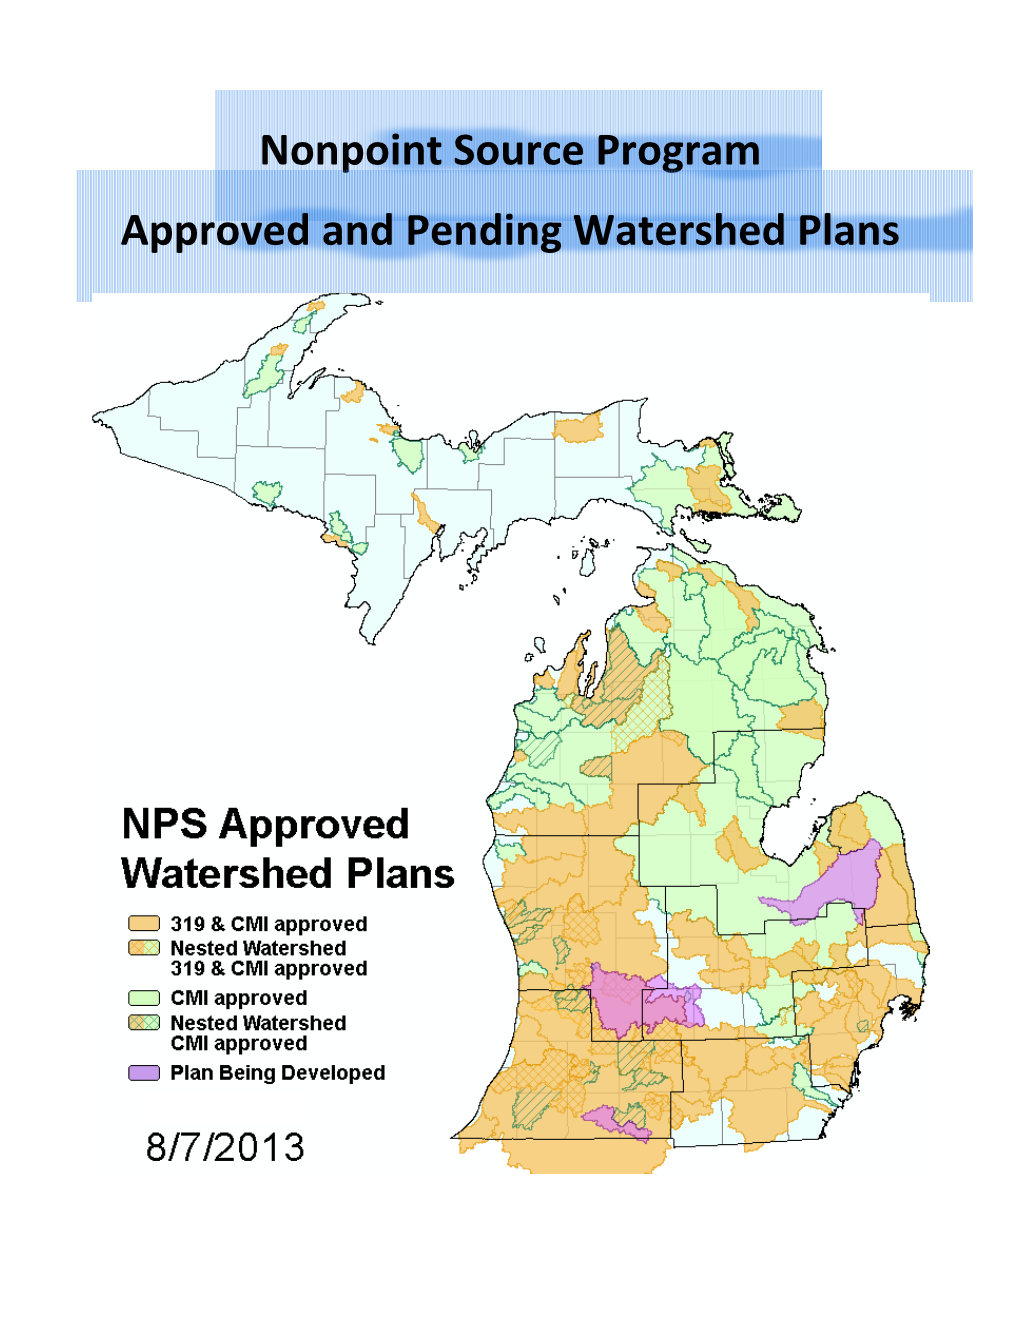 NPS Approved and Pending Watershed Plans